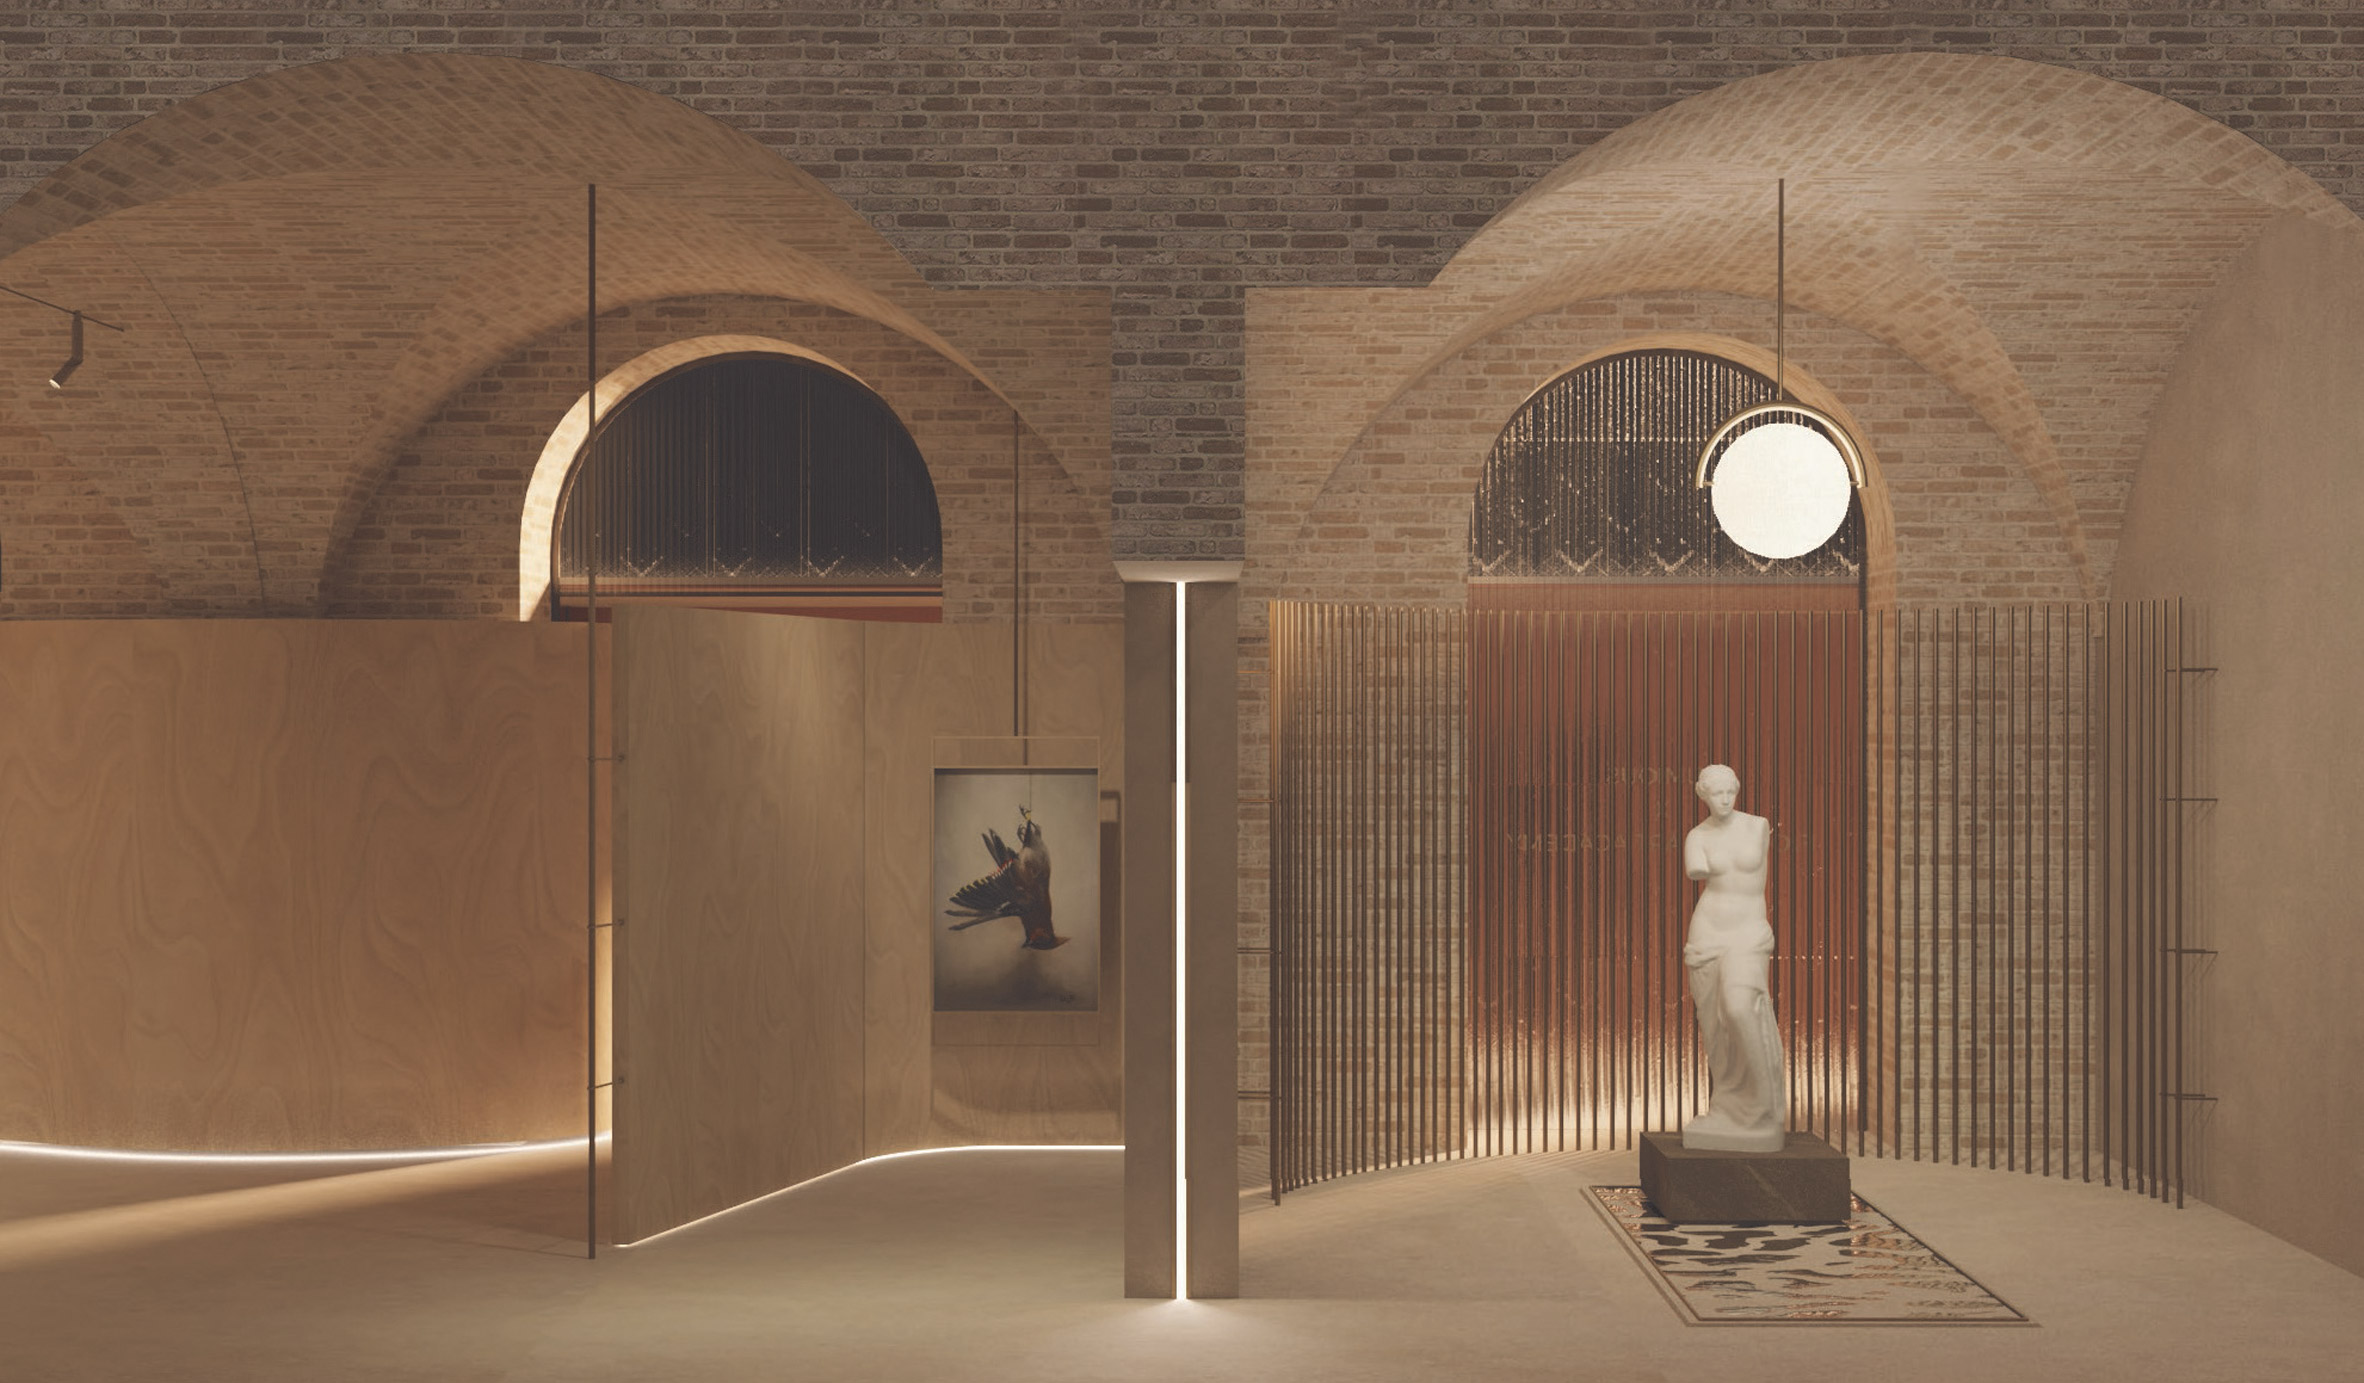 Rendering of a grand brick interior with arched windows and walls and interesting sculptures, lighting and artworks around the space